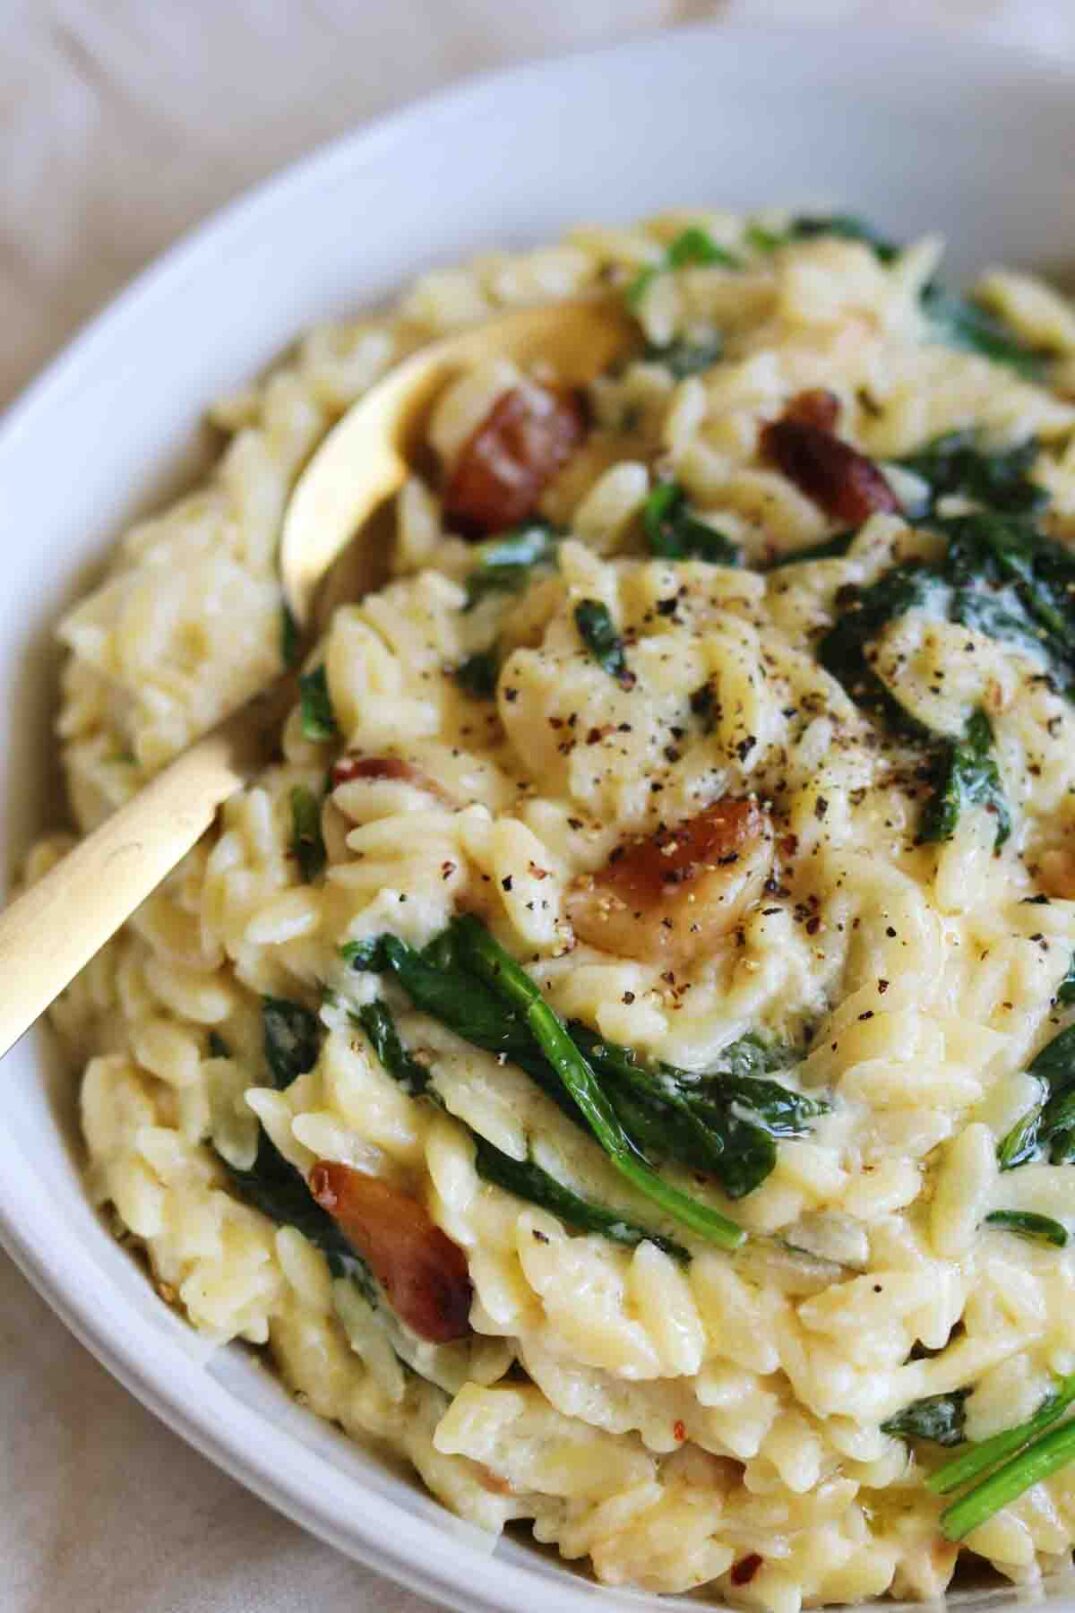 wilted spinach, golden roasted garlic cloves and creamy orzo in a white bowl.